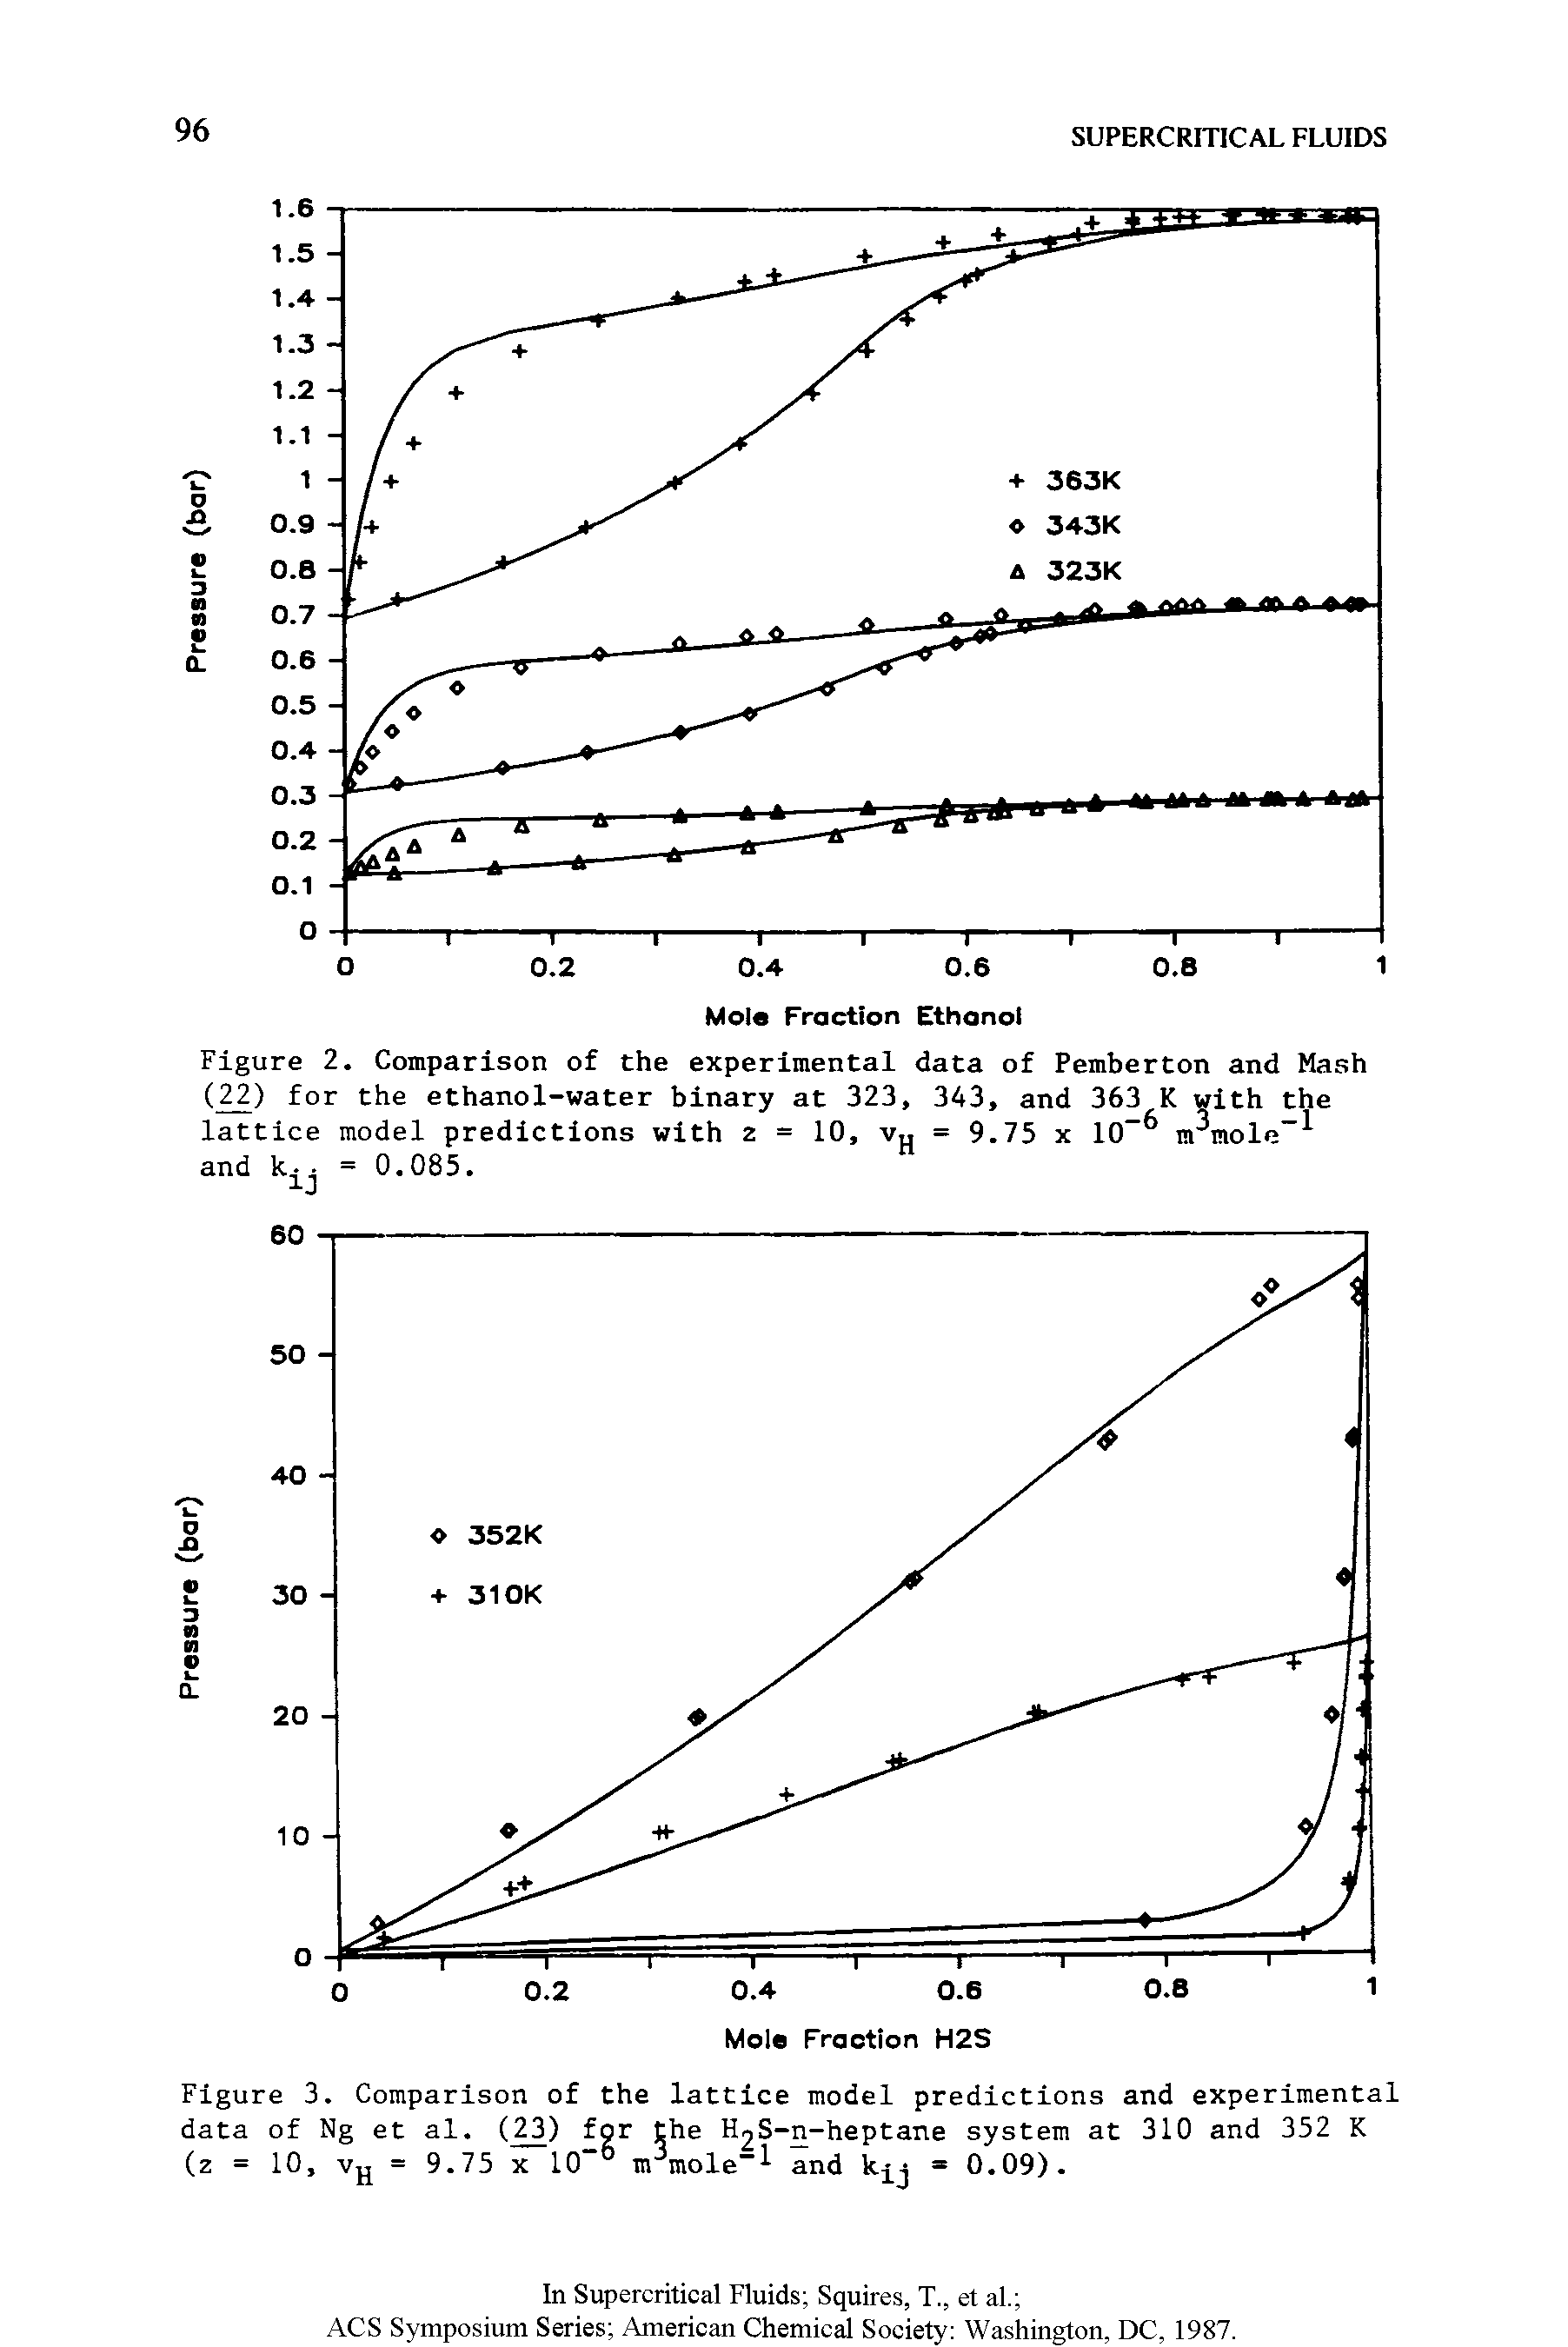 Figure 2. Comparison of the experimental data of Pemberton and Mash (22) for the ethanol-water binary at 323, 343, and 363 K with the lattice model predictions with z = 10, Vj, = 9.75 x 10- nrmole- and = 0.085.